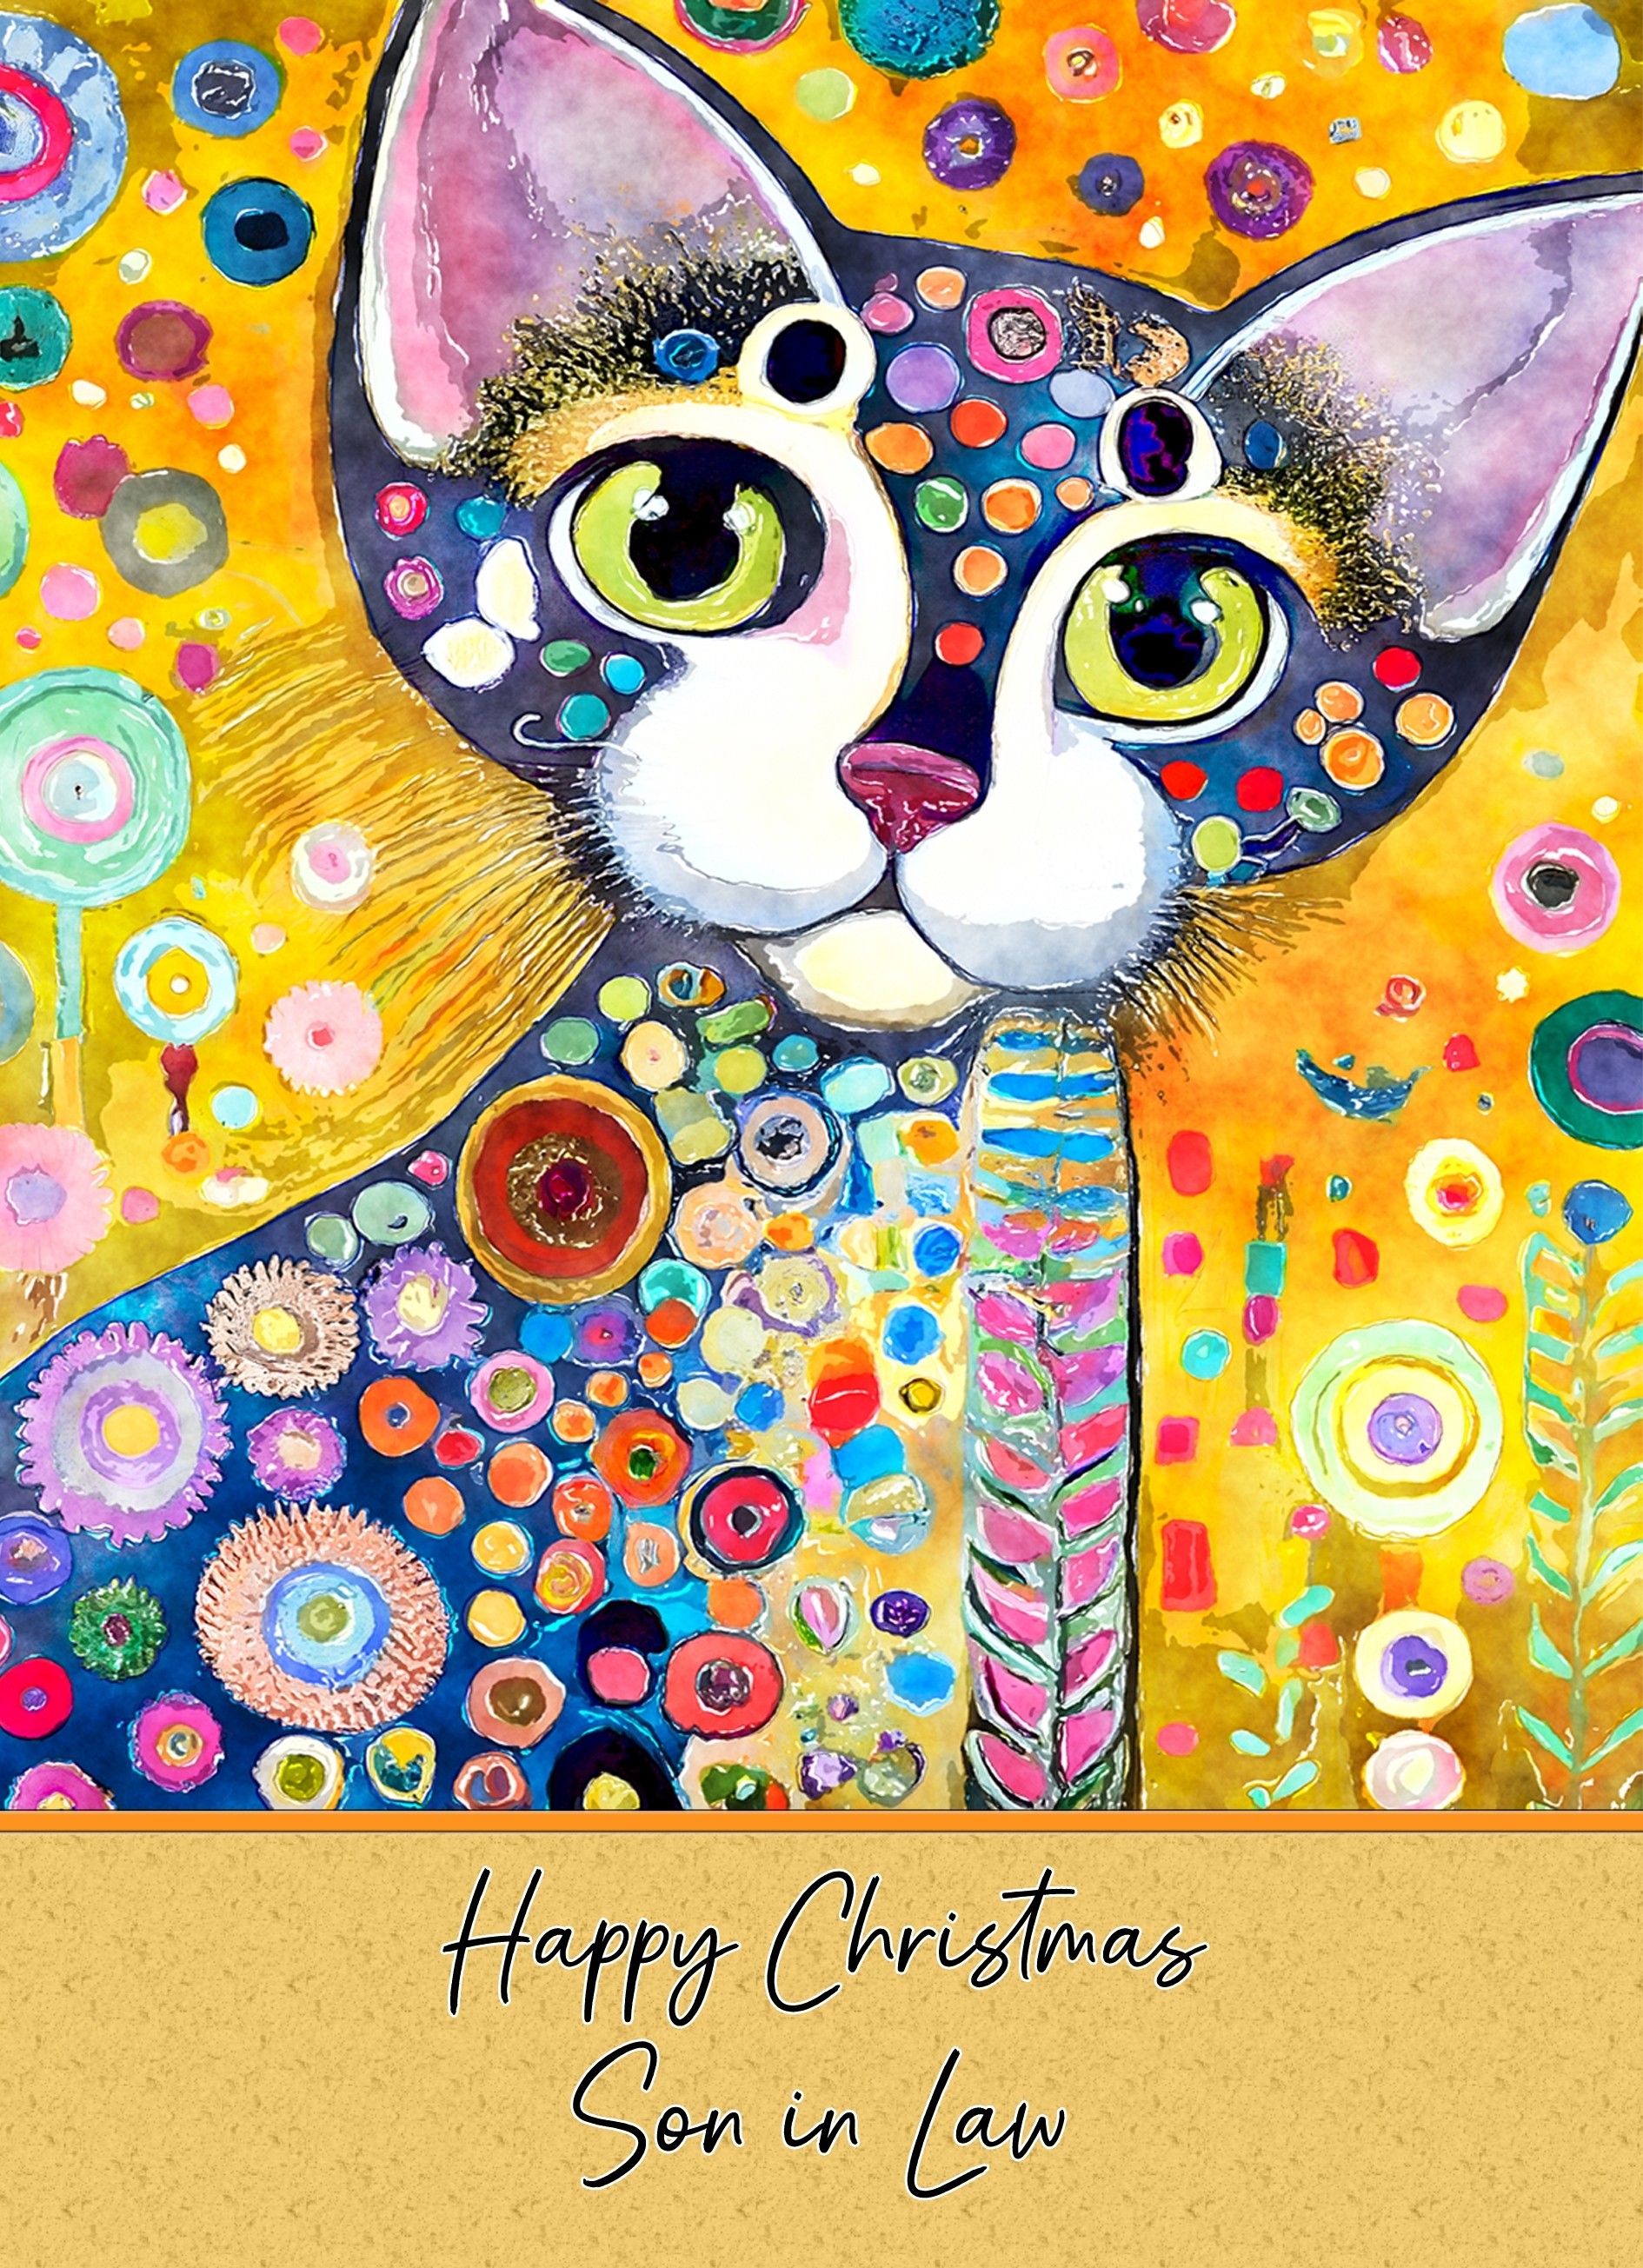 Christmas Card For Son in Law (Cat Art Painting, Design 2)